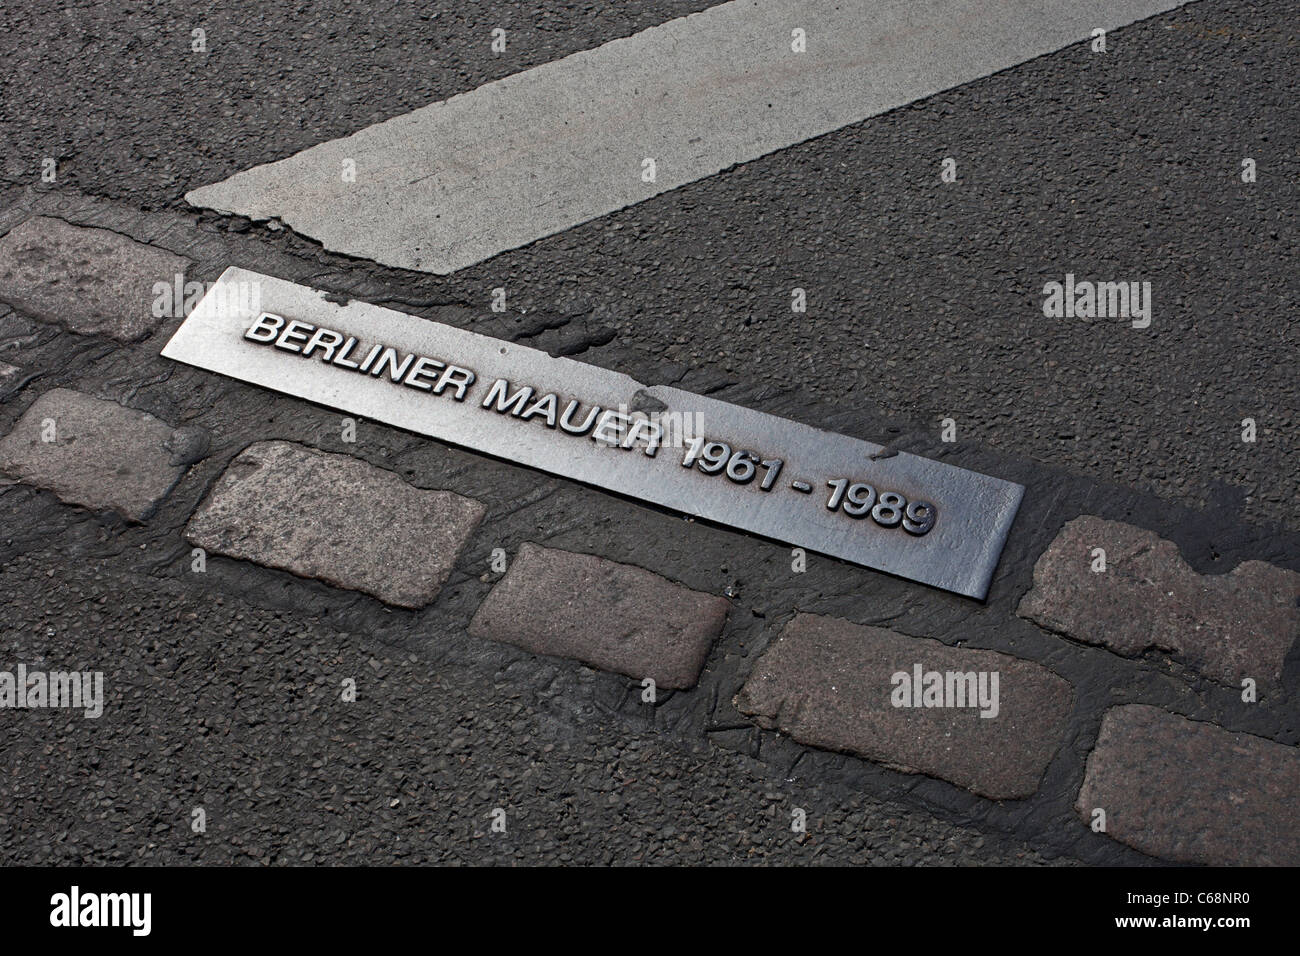 A plaque and paving stones on the street near the Brandenburg Gate mark the location of the former wall that divided Berlin. Stock Photo